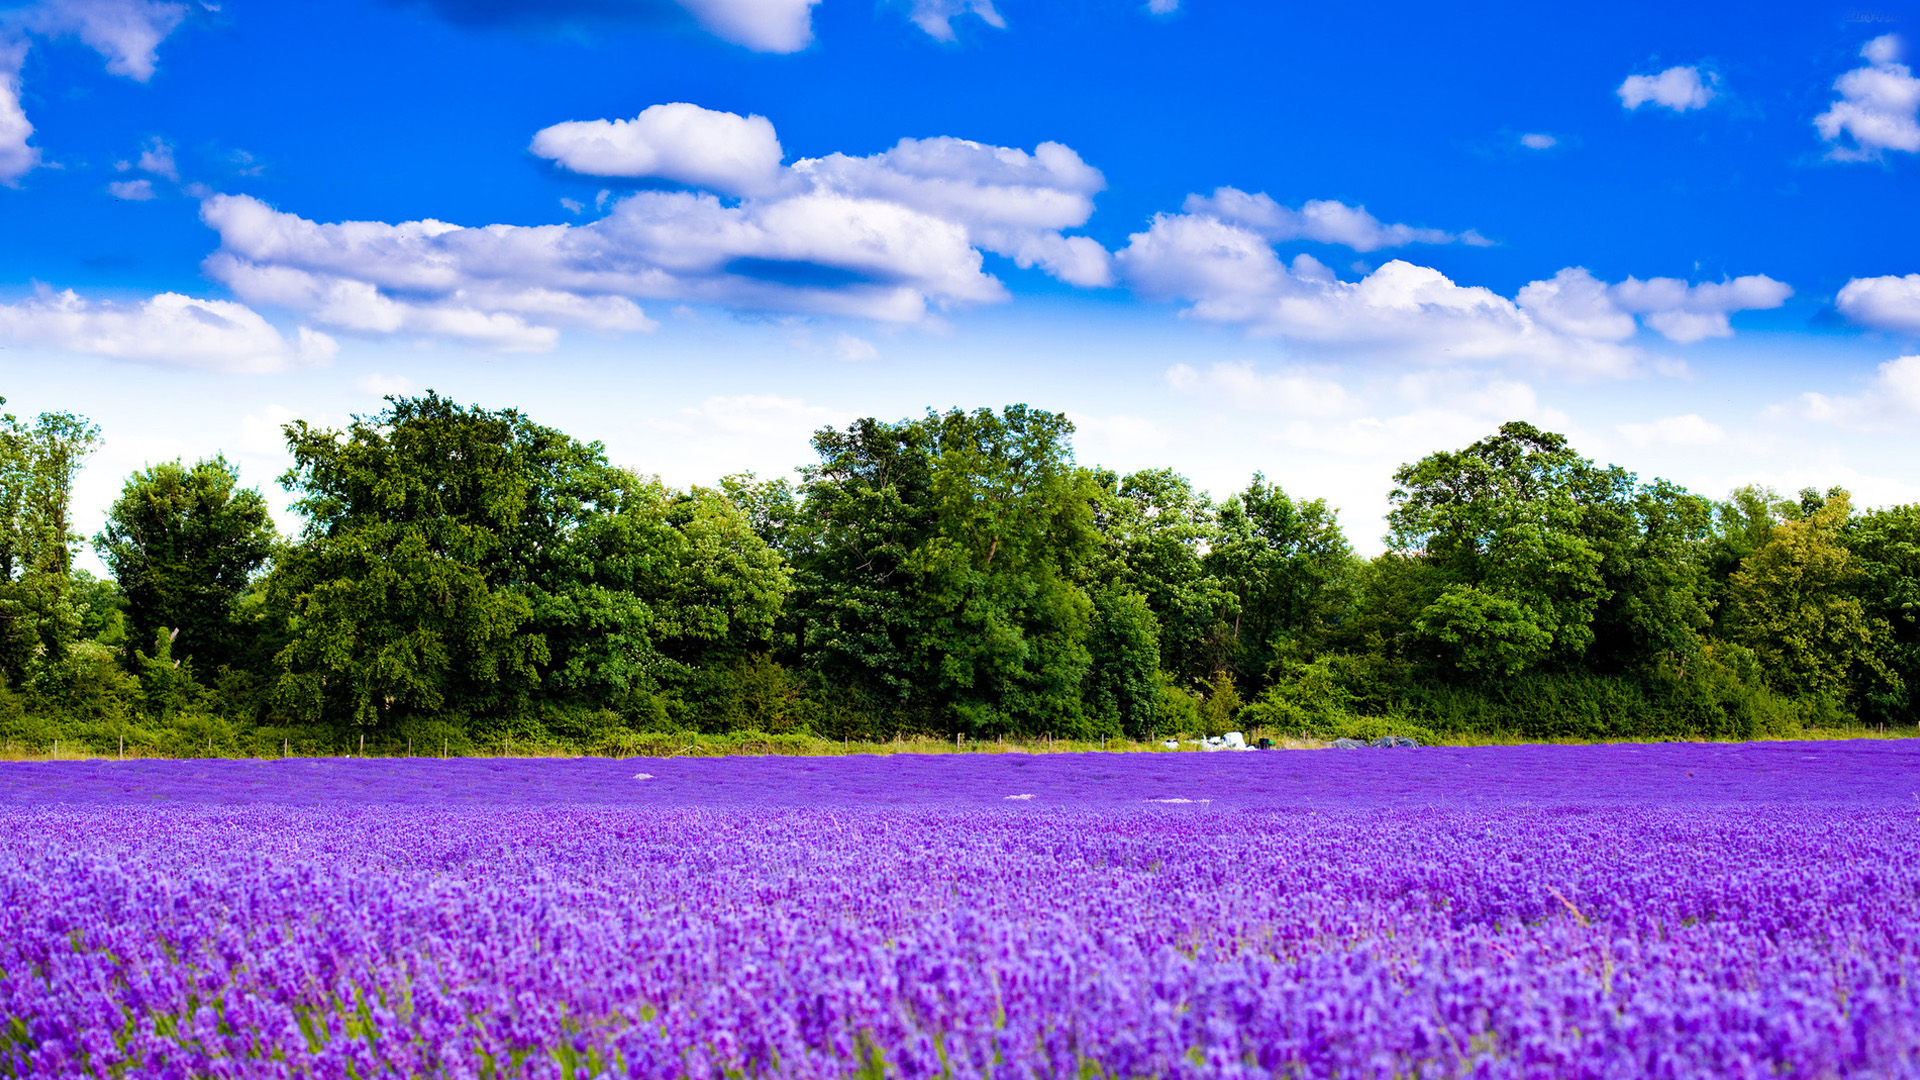 Hyacinth fields Wallpapers, Green Backgrounds, Pictures and images